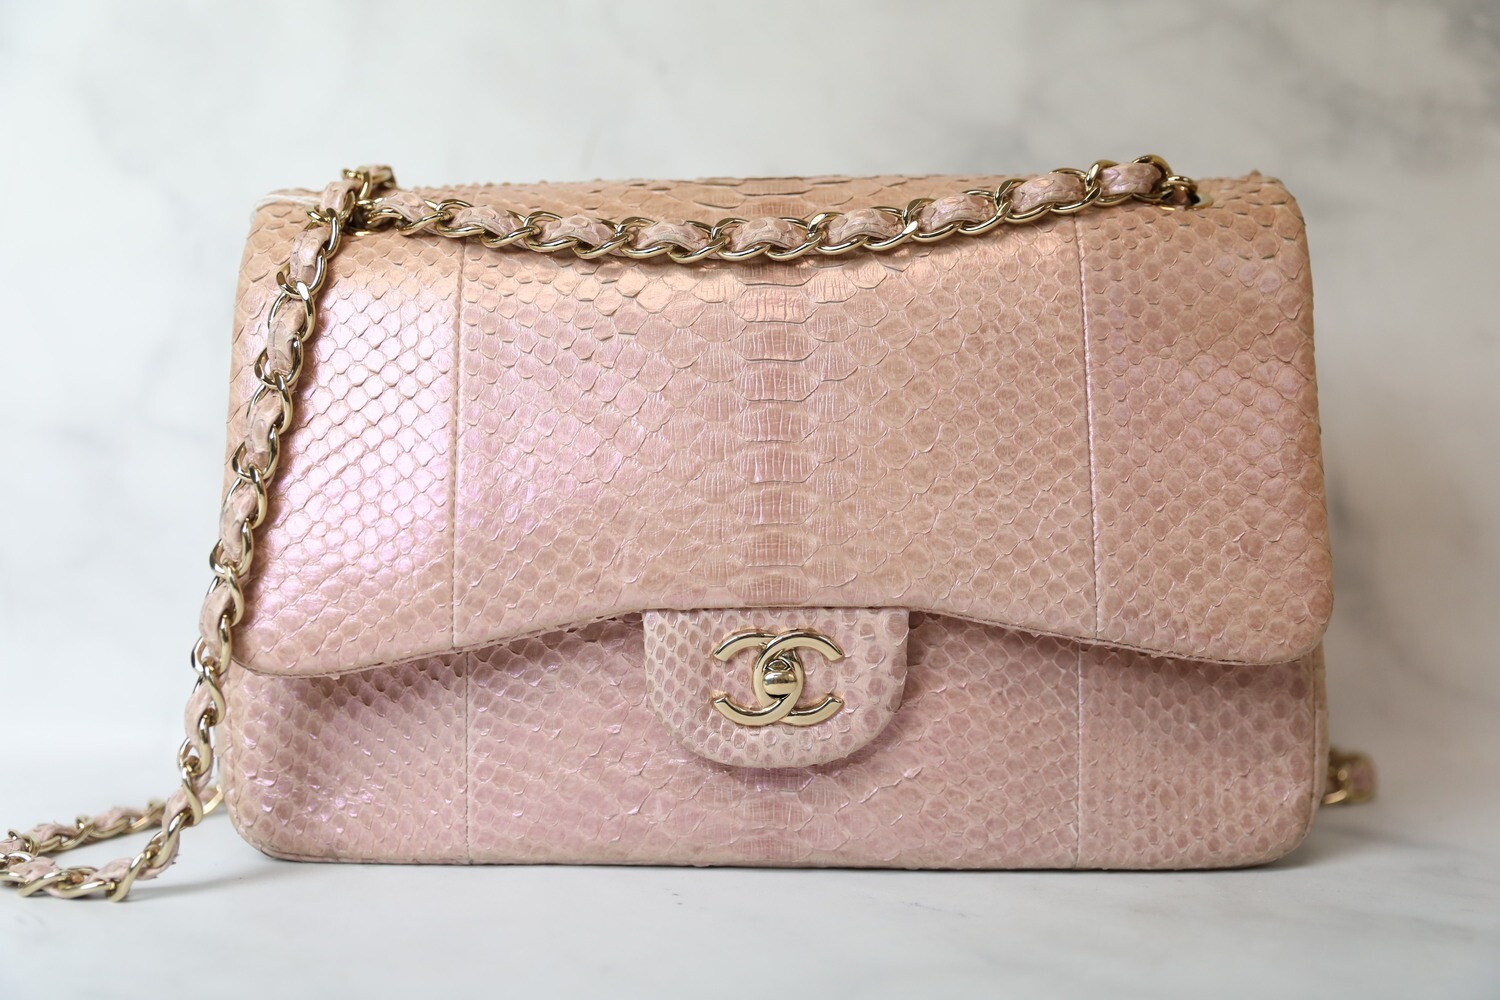 Chanel Classic Jumbo Exotic Python Metallic Rose with Gold Hardware,  Pre-Owned In Black Dustbag - Julia Rose Boston